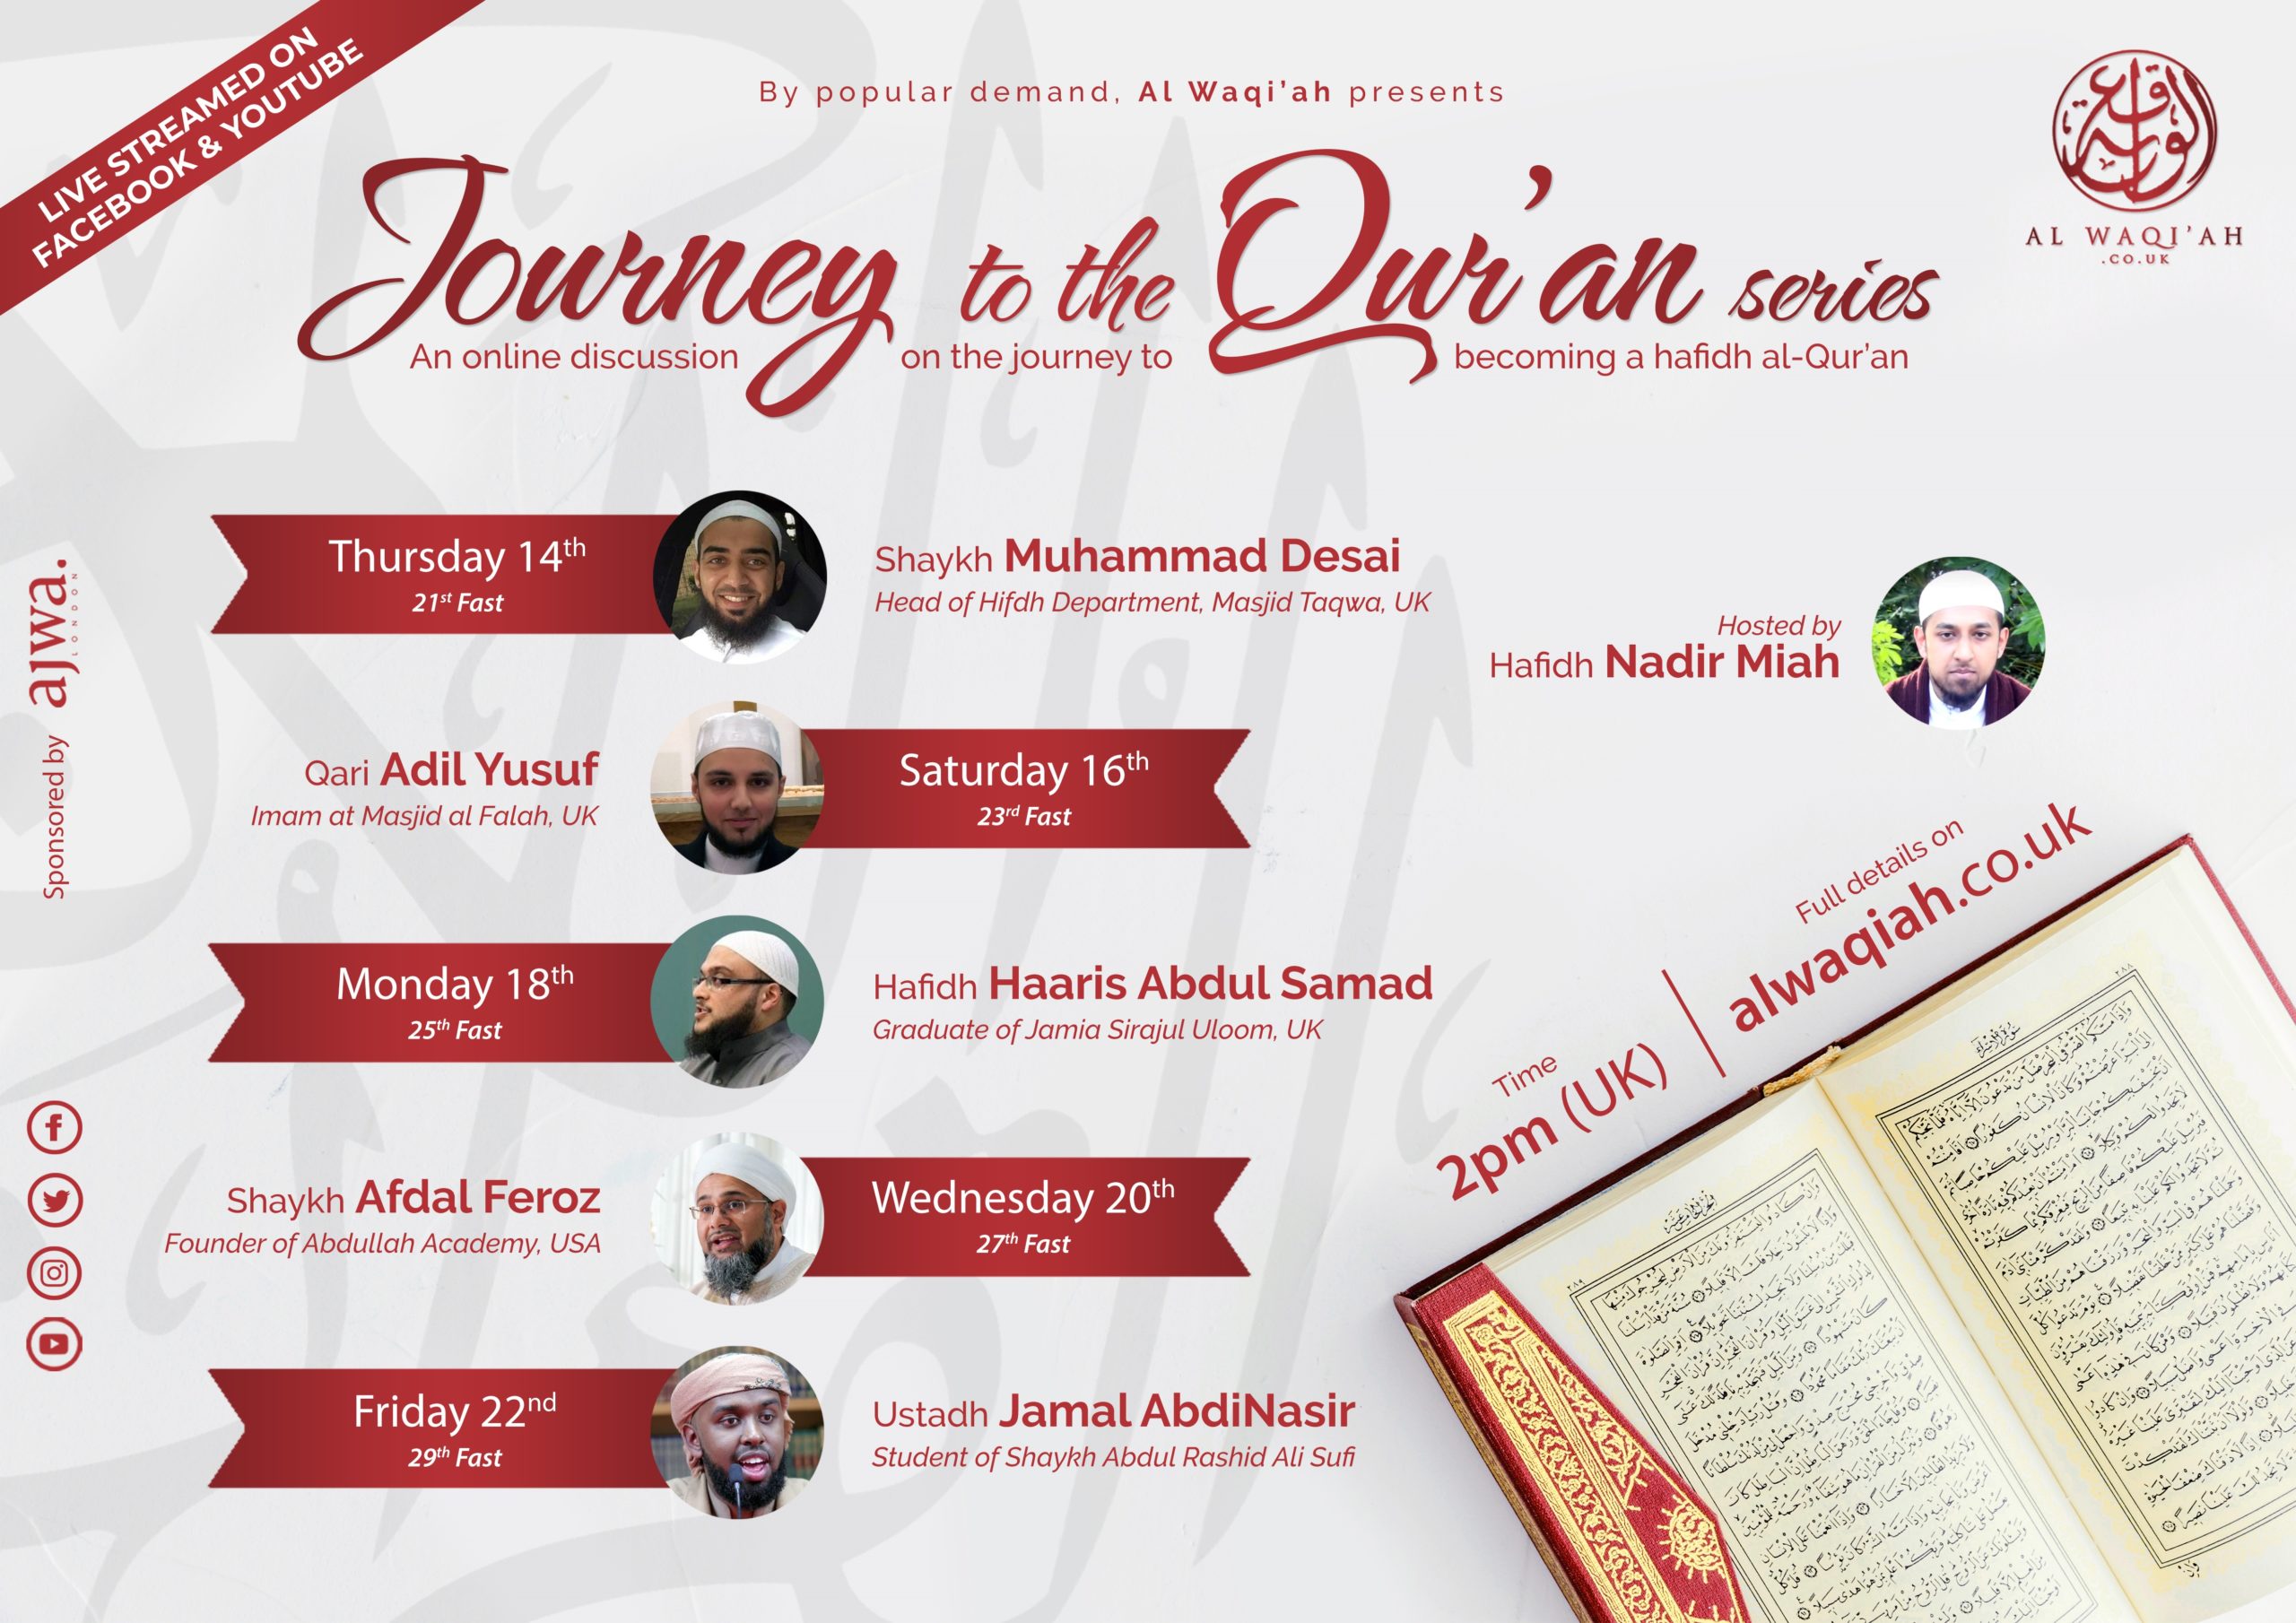 JOURNEY TO THE QUR'AN SERIES